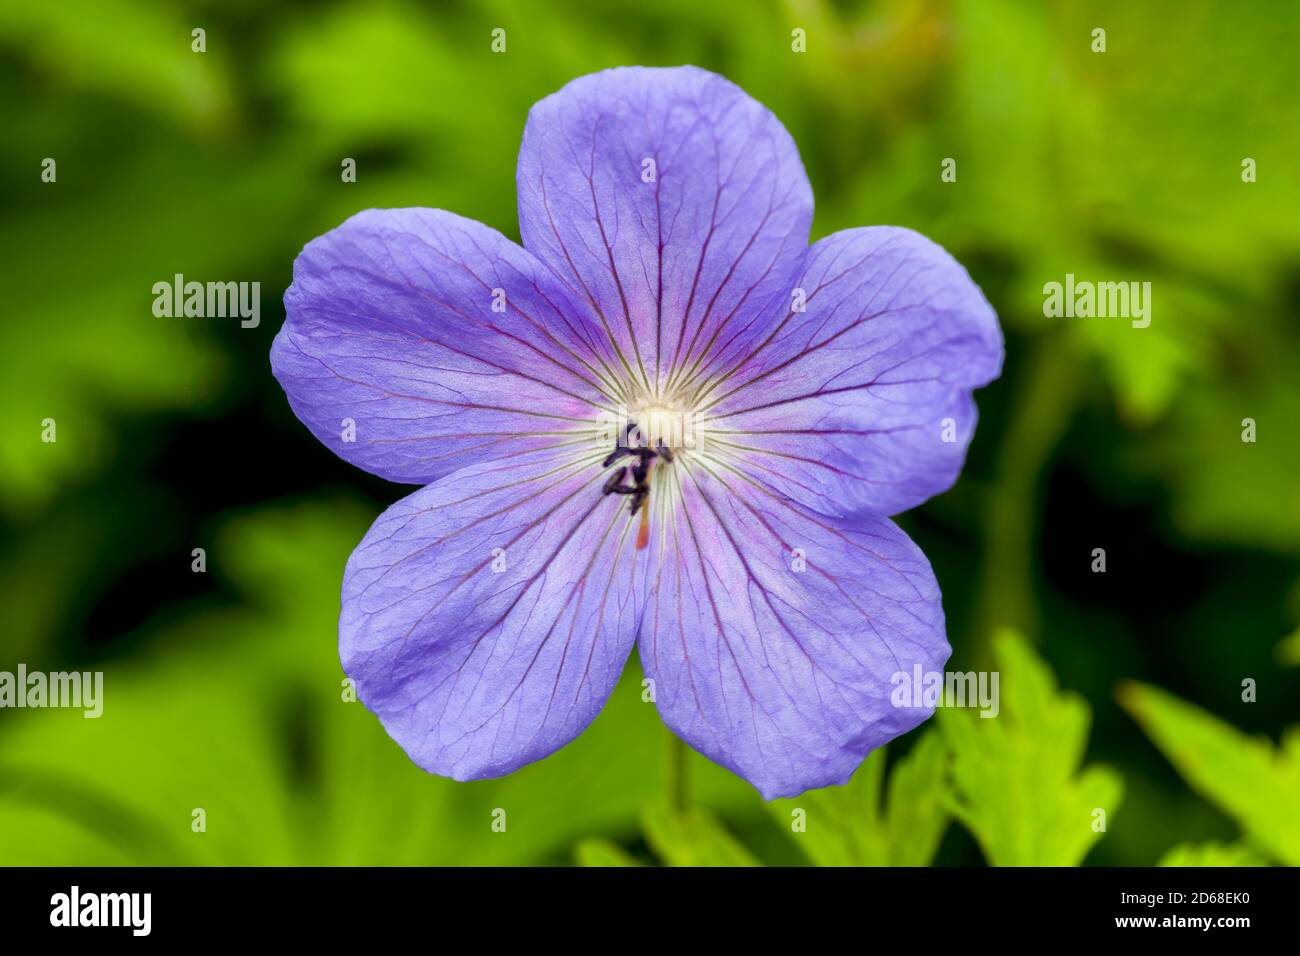 Geranium himalayense 'Irish Blue' a springtime summer flower which is a spring herbaceous perennial plant commonly known as cranesbill Stock Photo